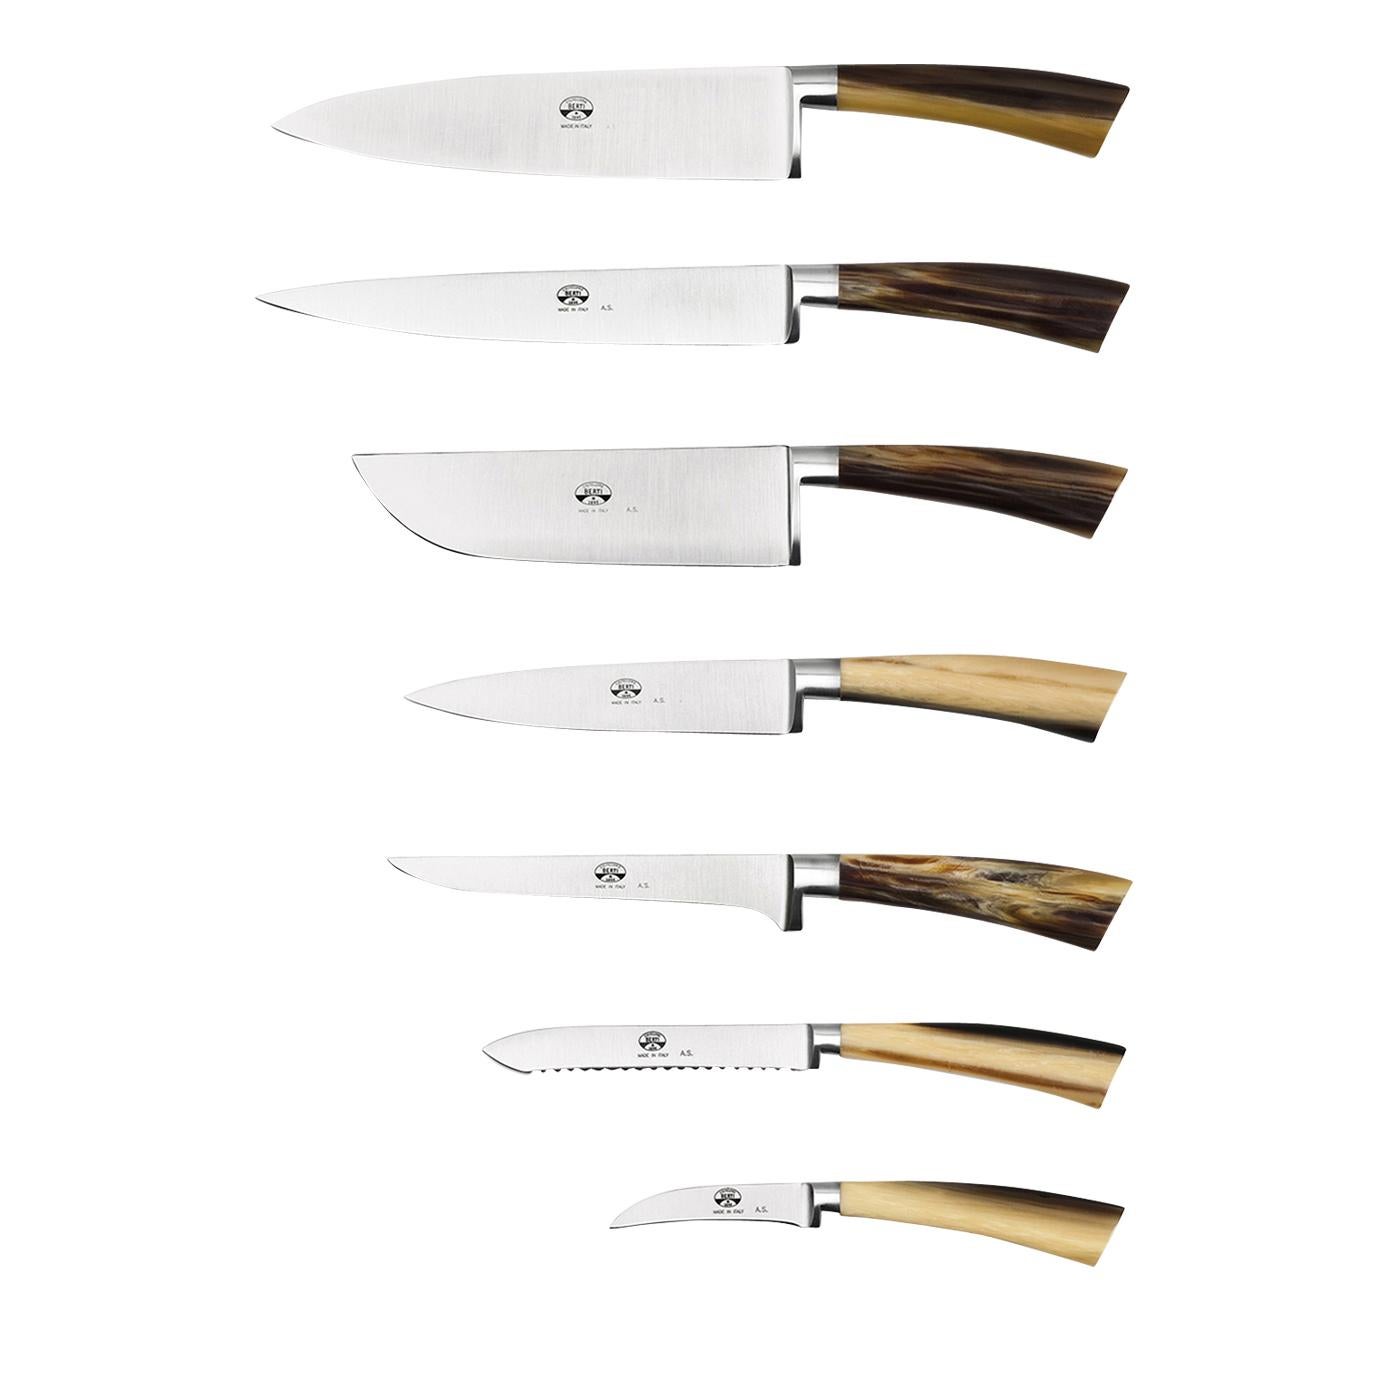 This exquisite set features seven magnificent knives, all handmade and collected in a wooden box that makes this also a precious gift for a food lover. These seven knives, all meant to be used to prepare food, are so striking that they will enhance